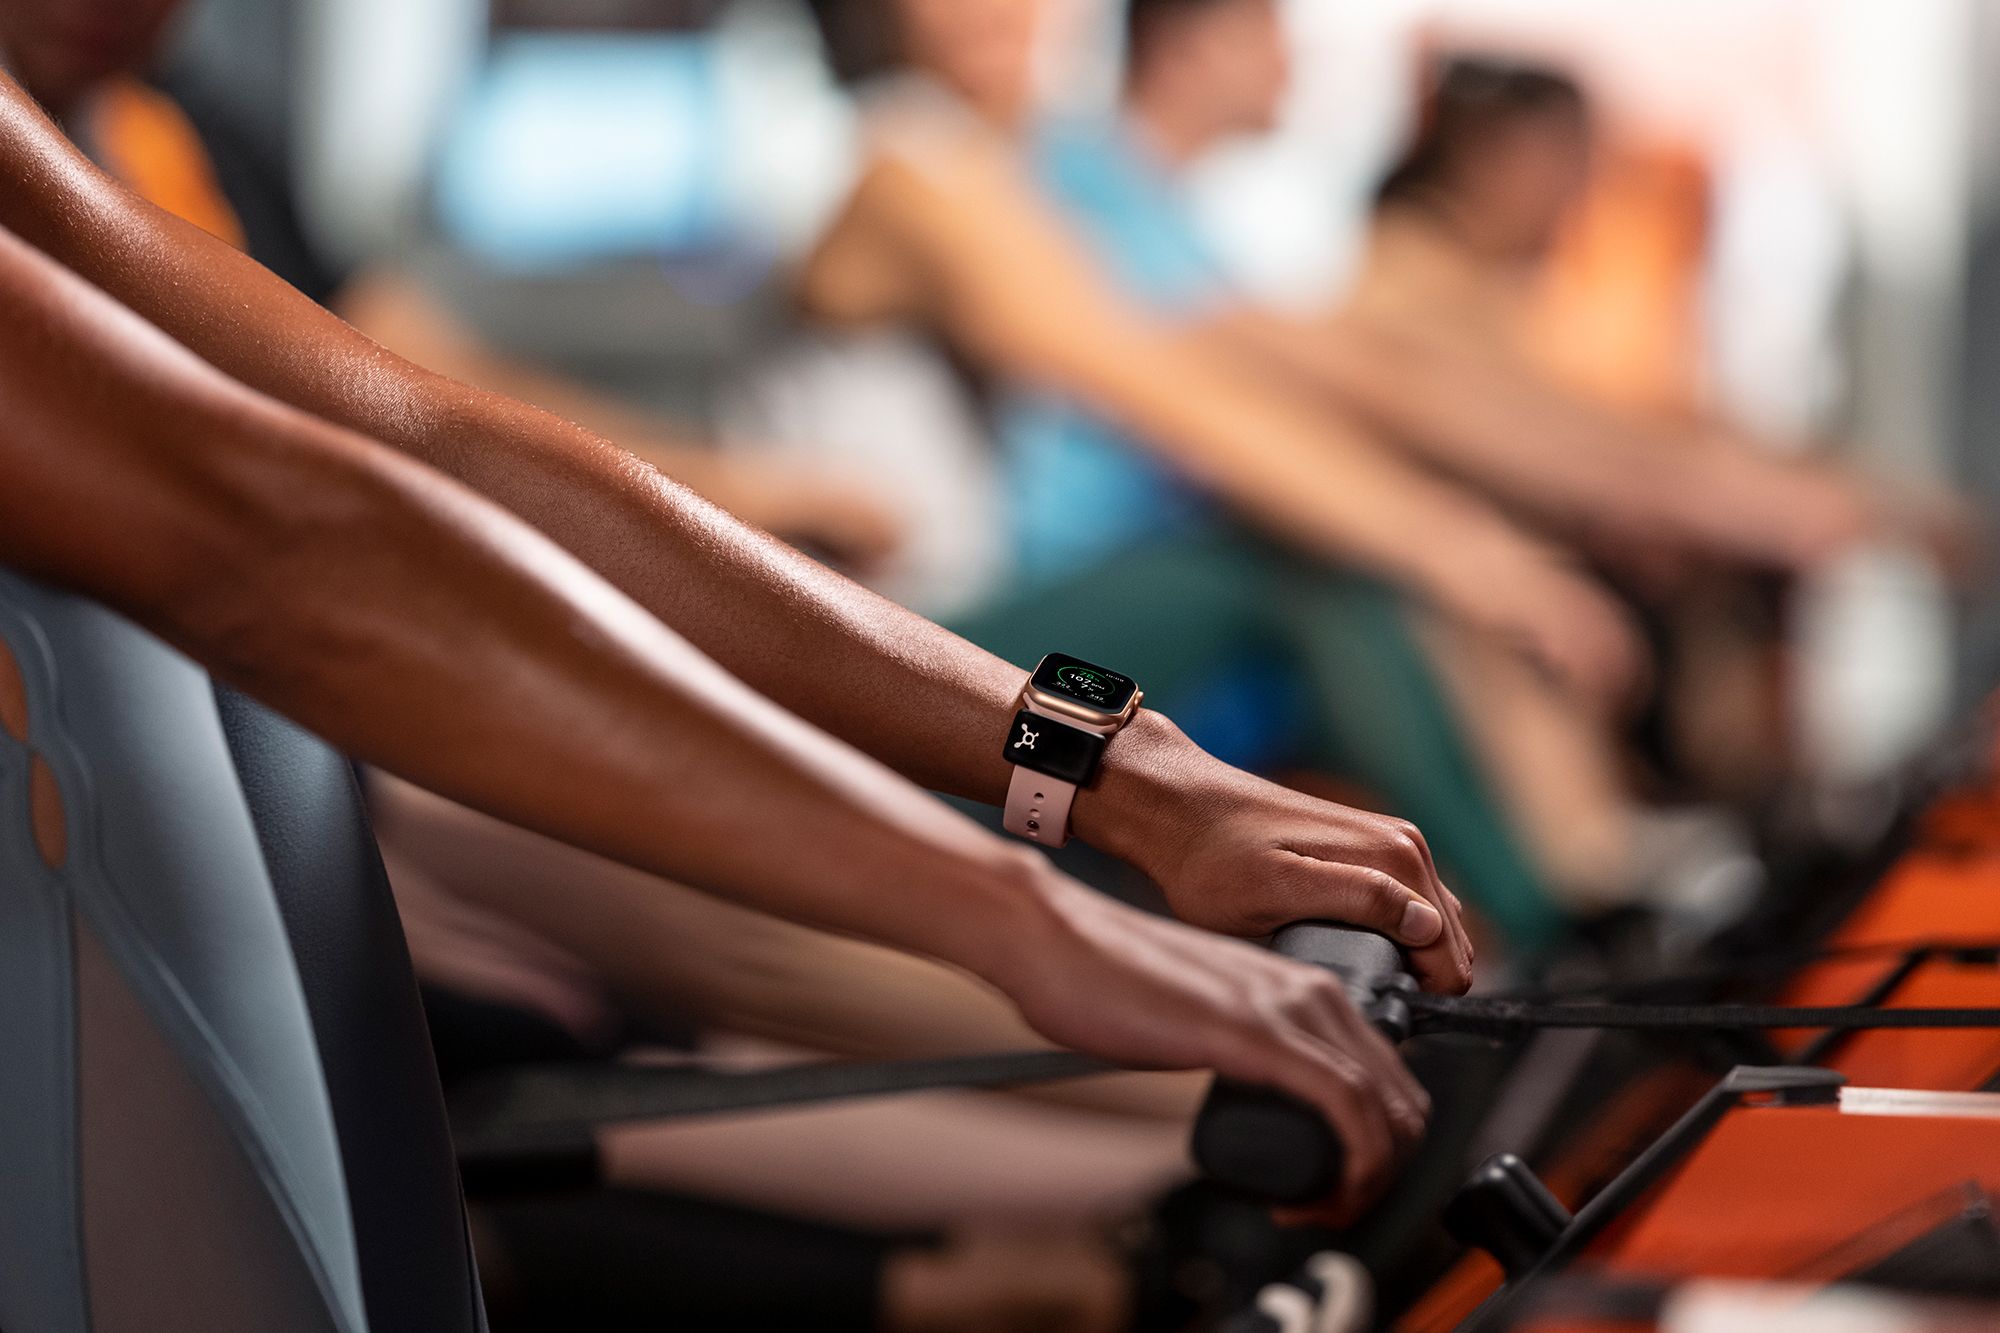 Apple Watch will soon track your Orangetheory workouts